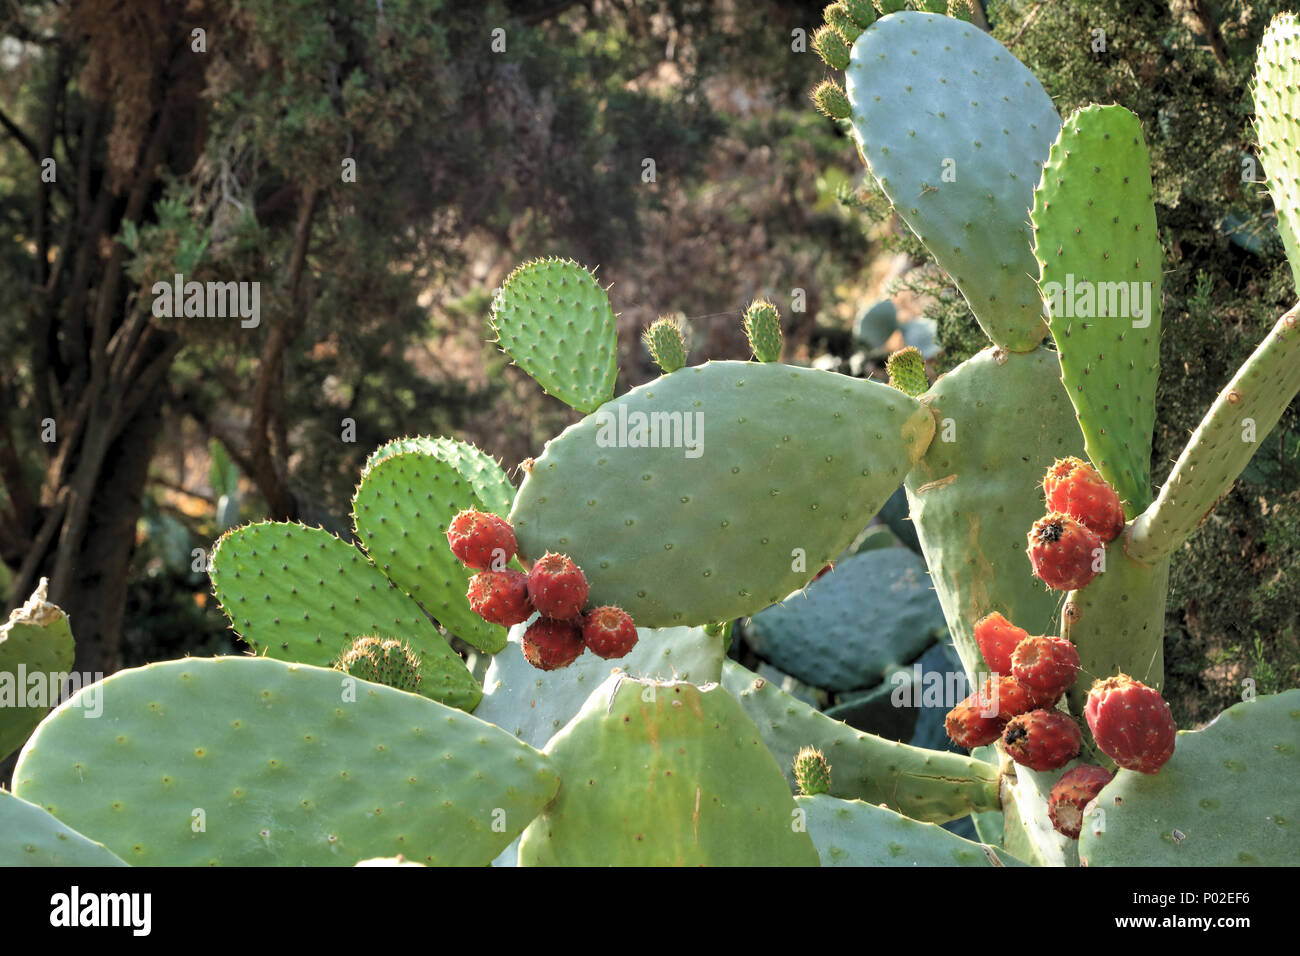 Prickly pear cactus with tunas fruits Stock Photo